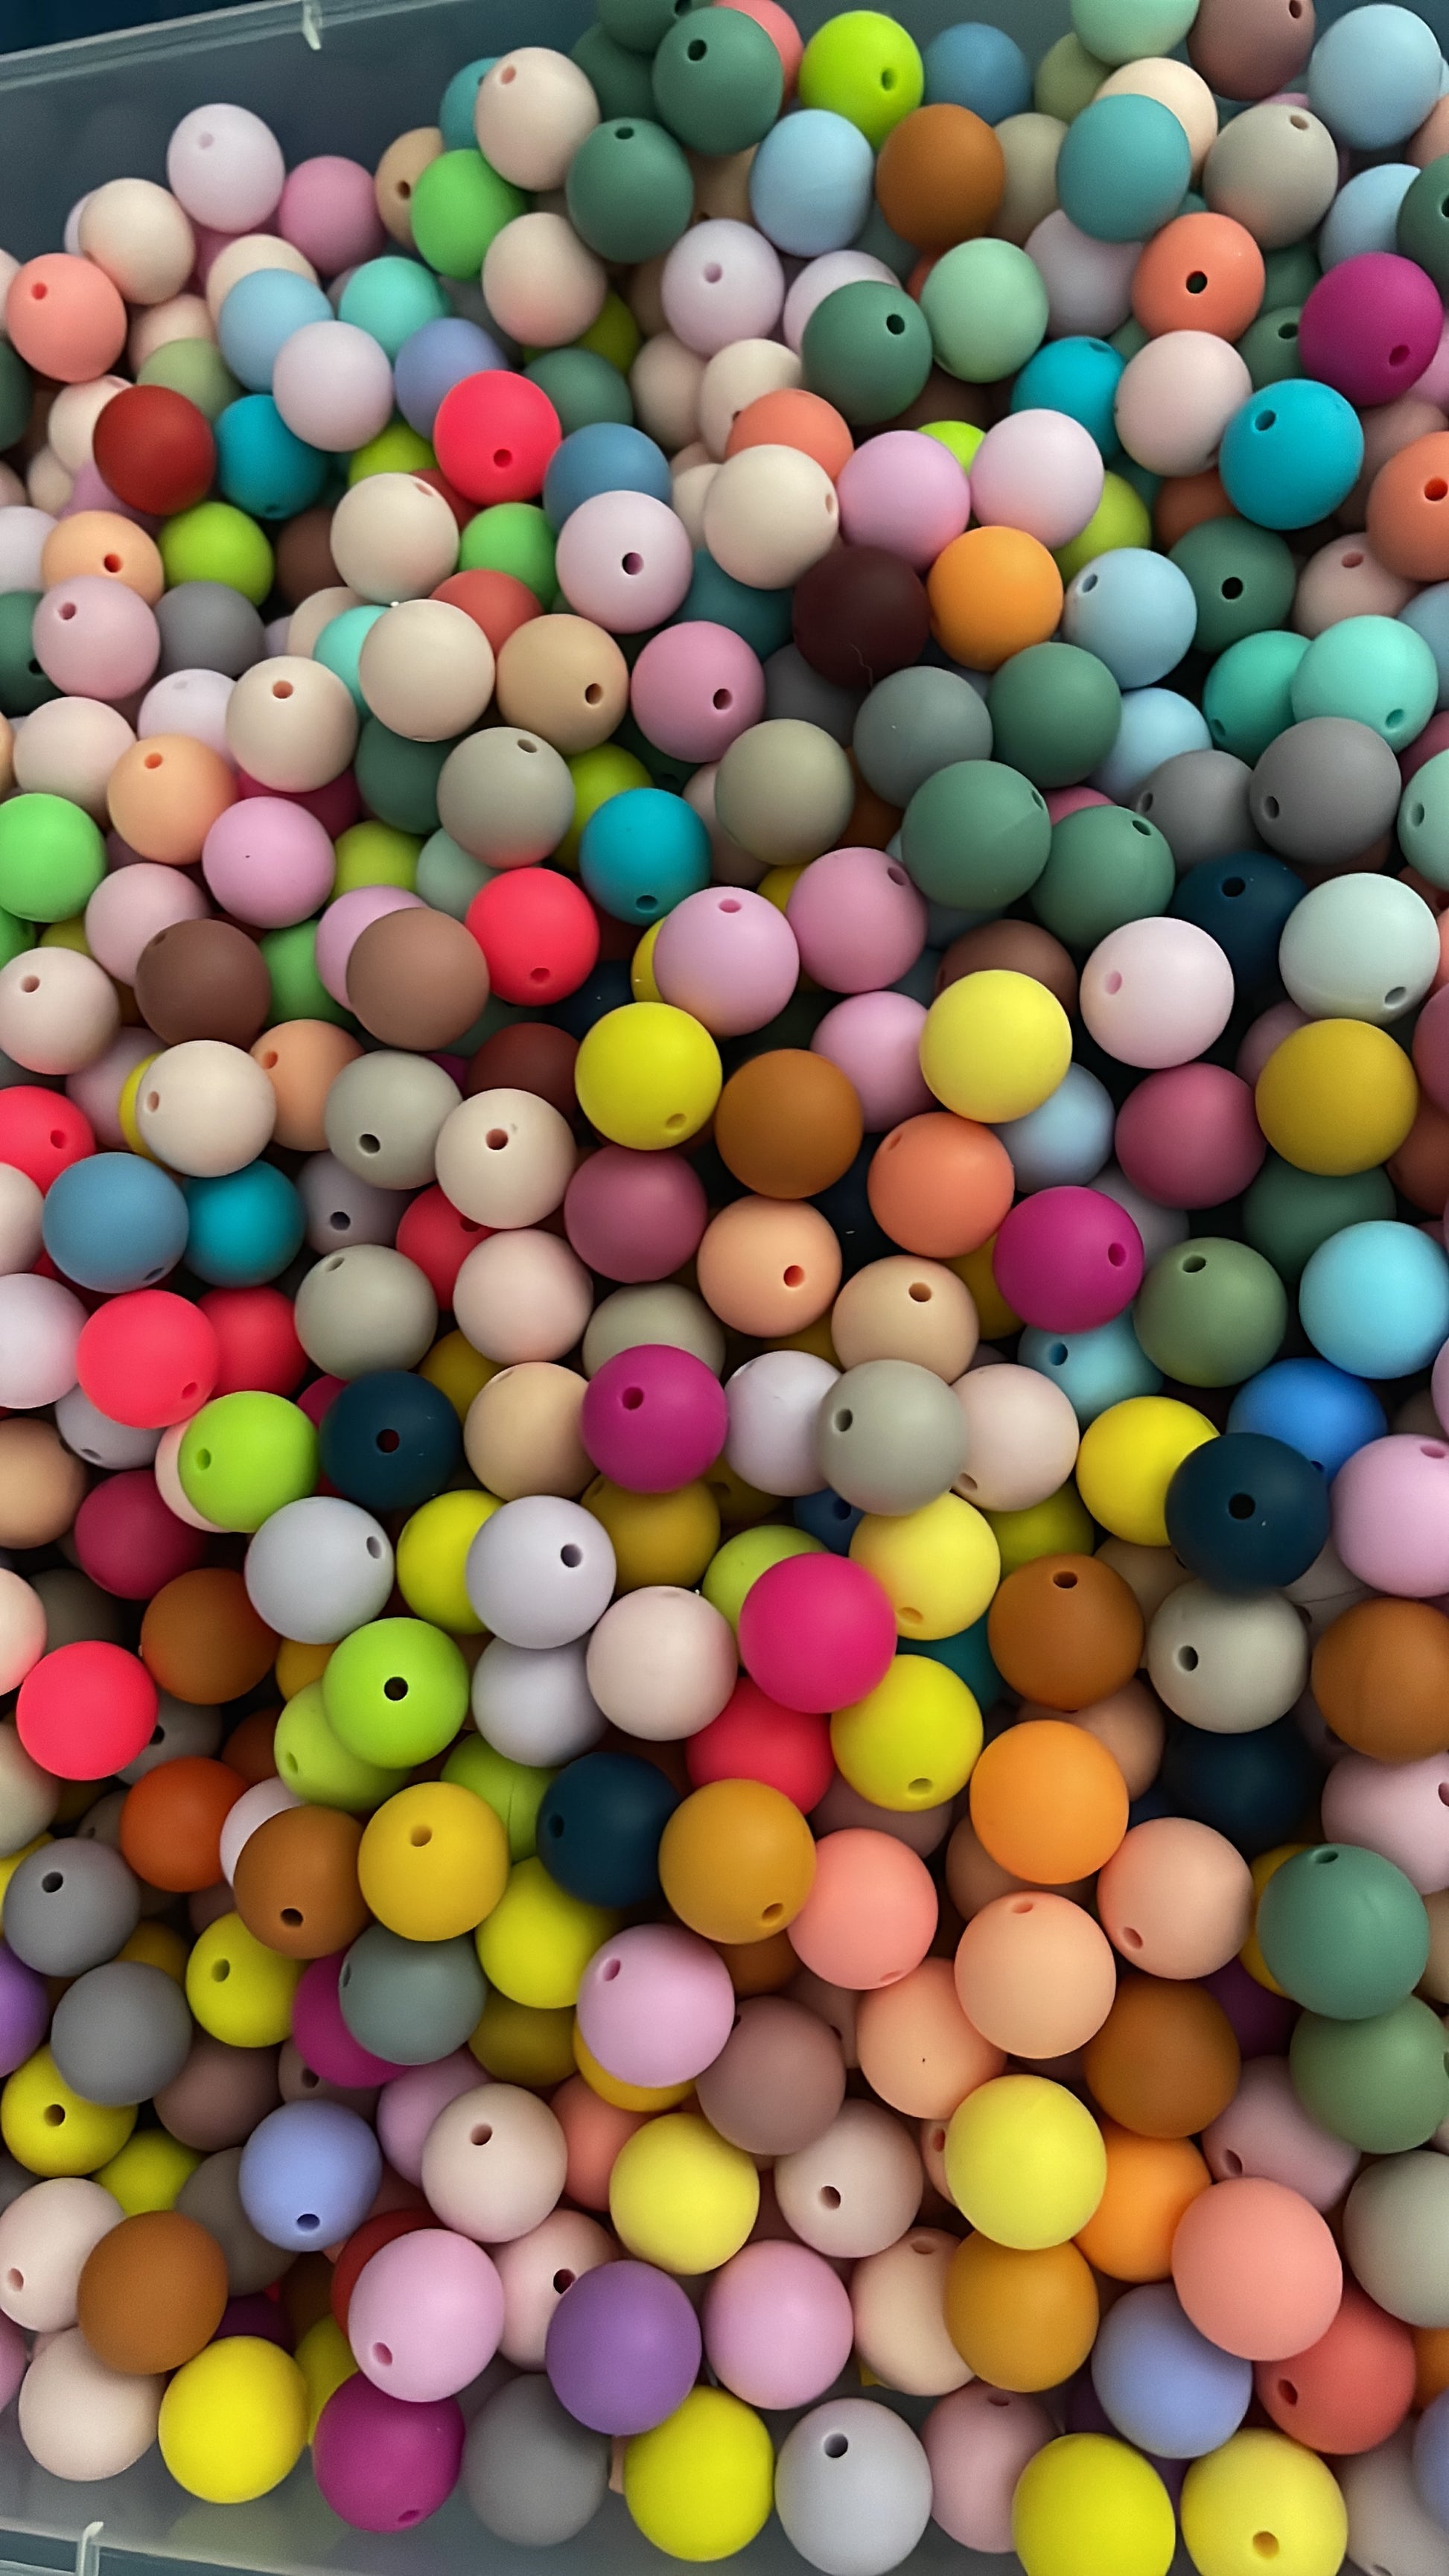 Silicone Wholesale--Mix & Match--9mm Bulk Silicone Beads--100